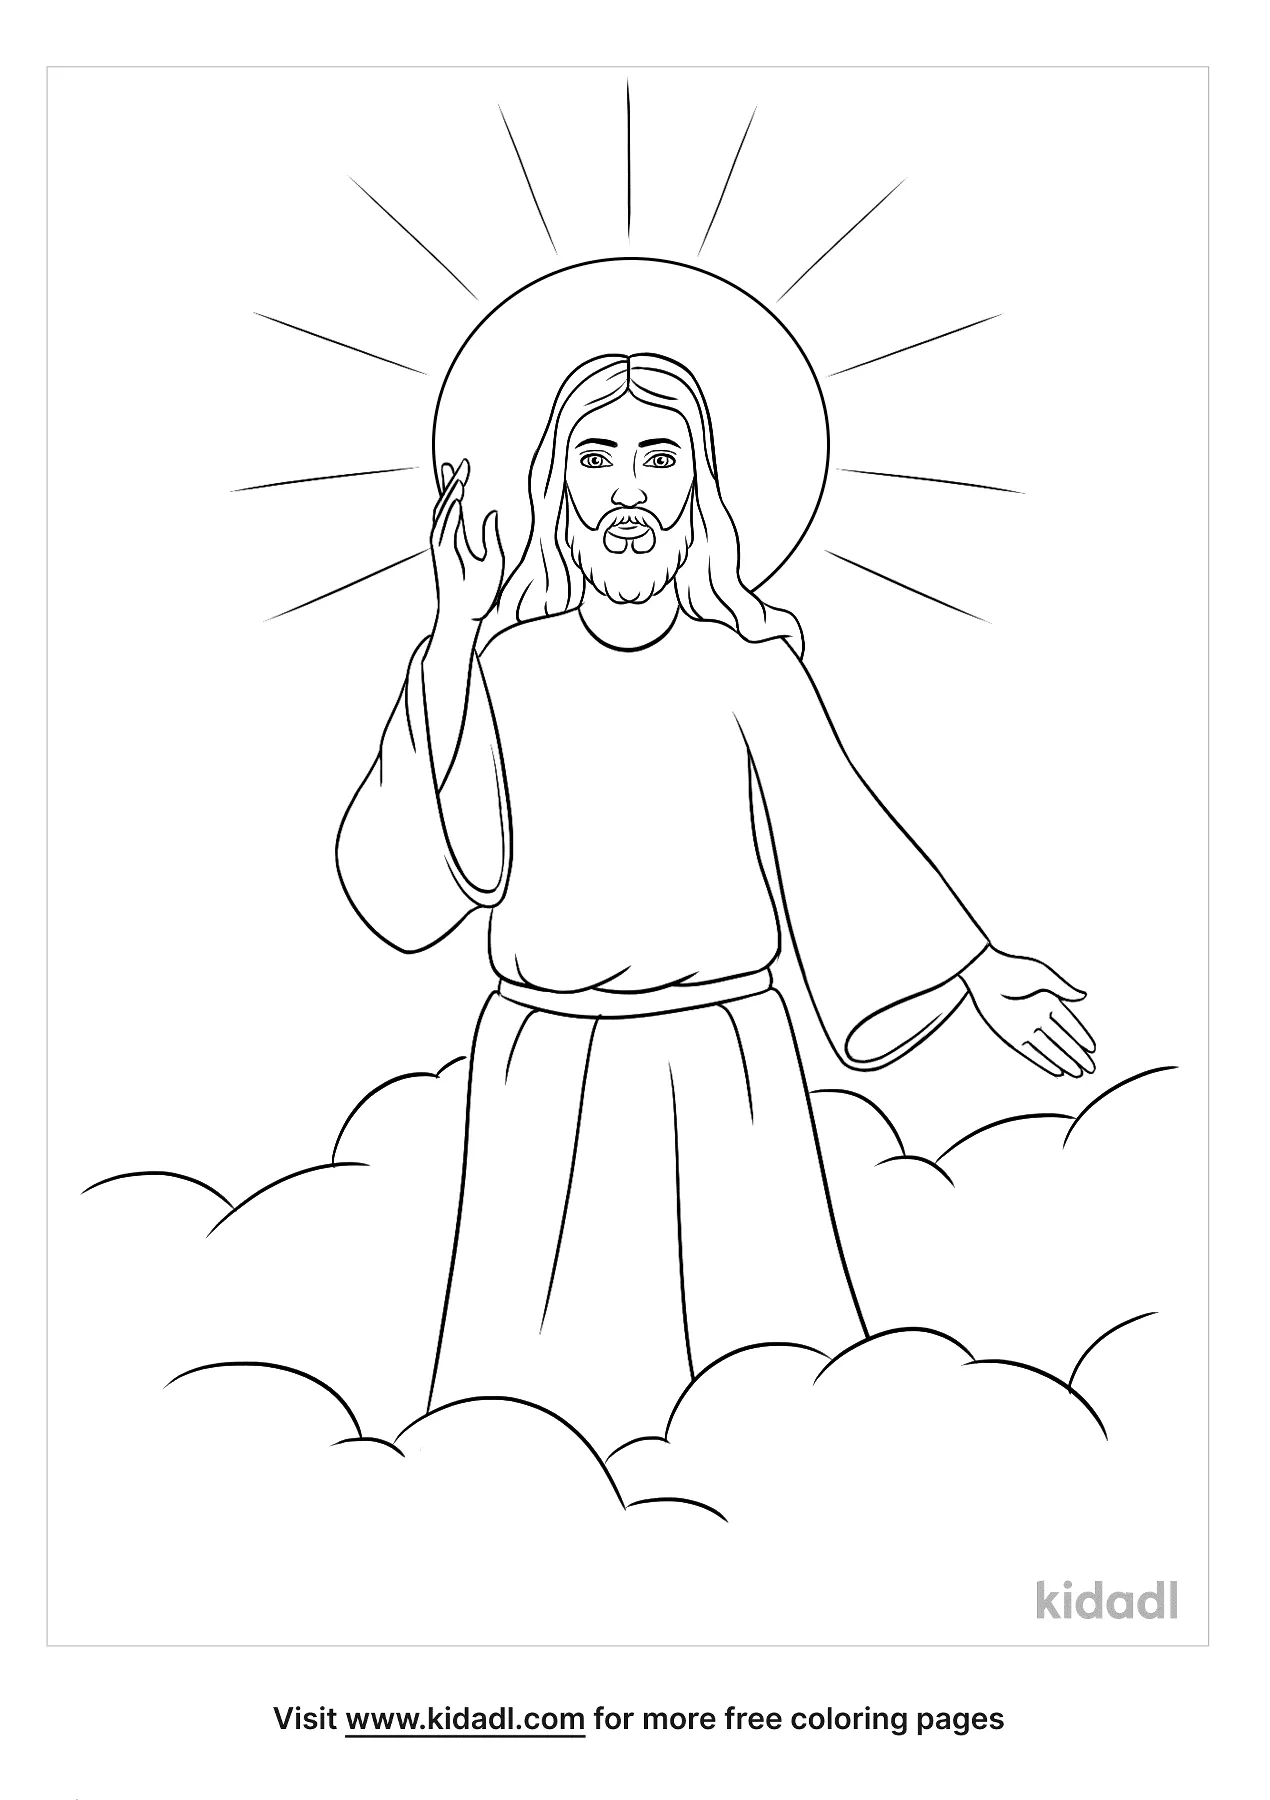 Free Coloring Pages Of Clouds